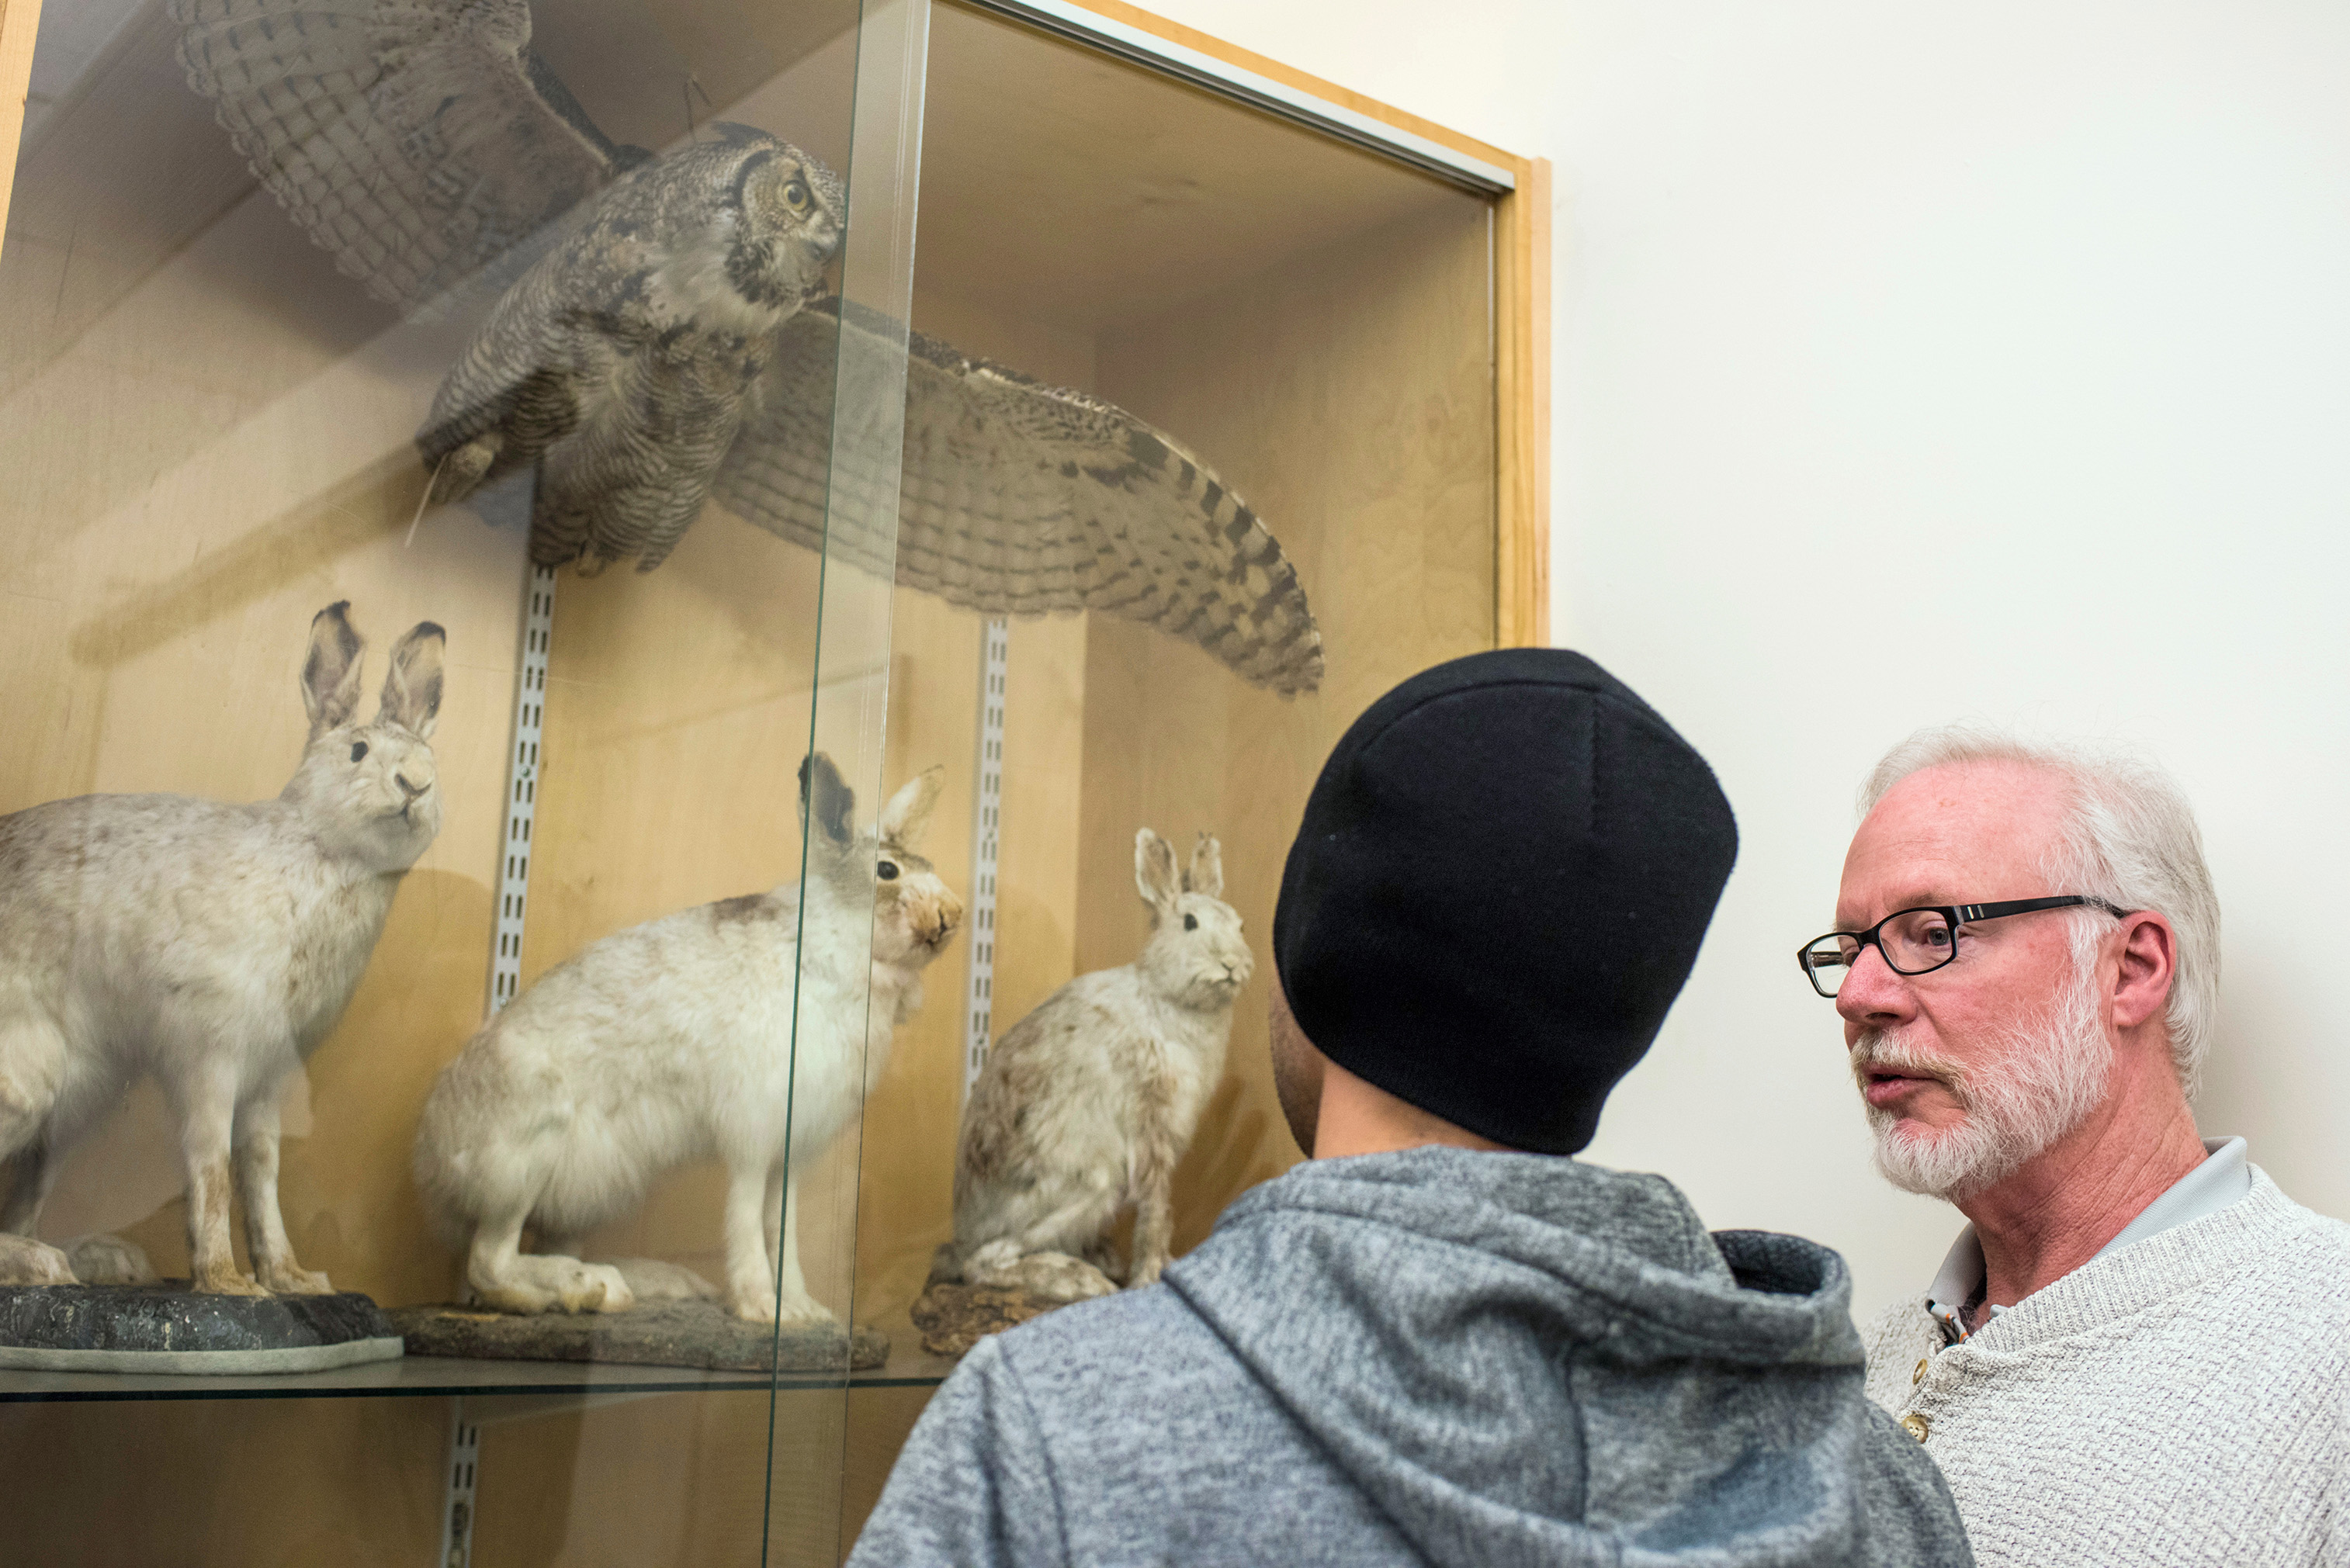 Curator John Acorn converses with a student, in front of a glass display of three rabbits and a flying owl